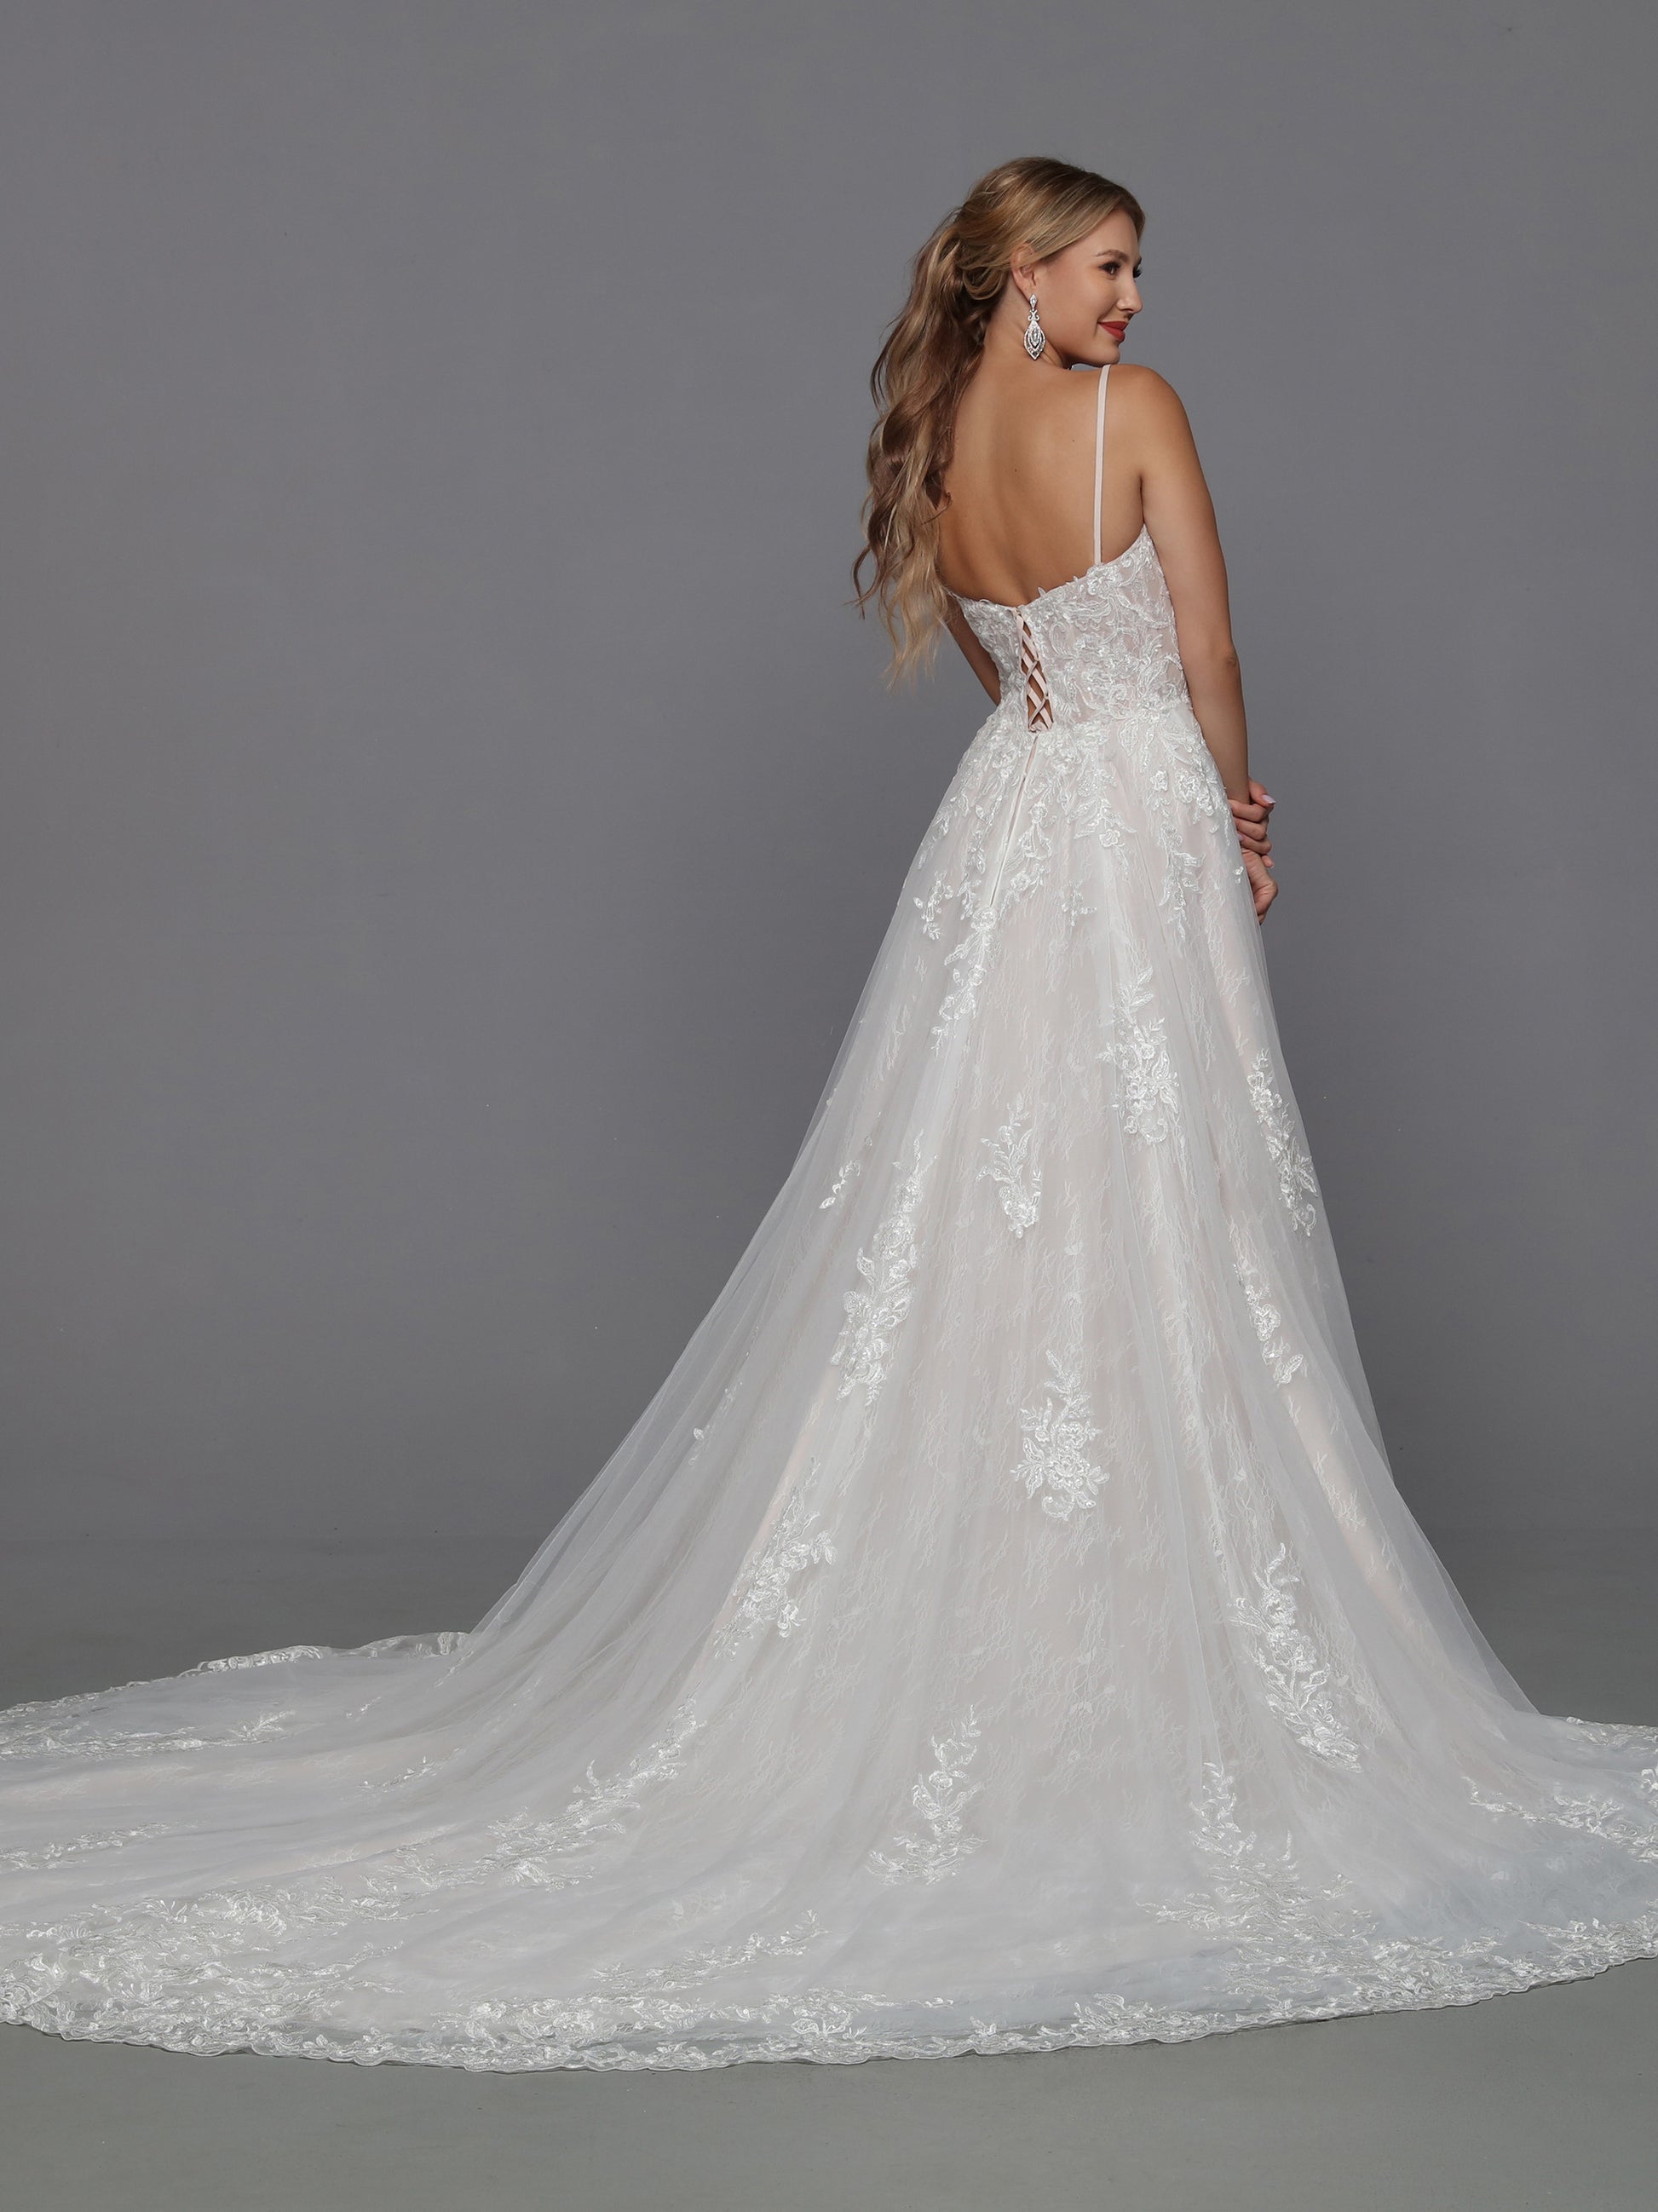 DaVinci Bridal 50786 A-Line Ballgown Plunging Neckline Spaghetti Straps Floral Lace Appliques Train Lace Up Back Wedding Gown. This pretty lace slip dress can be anything you want it to be. Wear it as shown for a soft A-line look or add a fluffy petticoat for a Cinderella ball gown vibe.